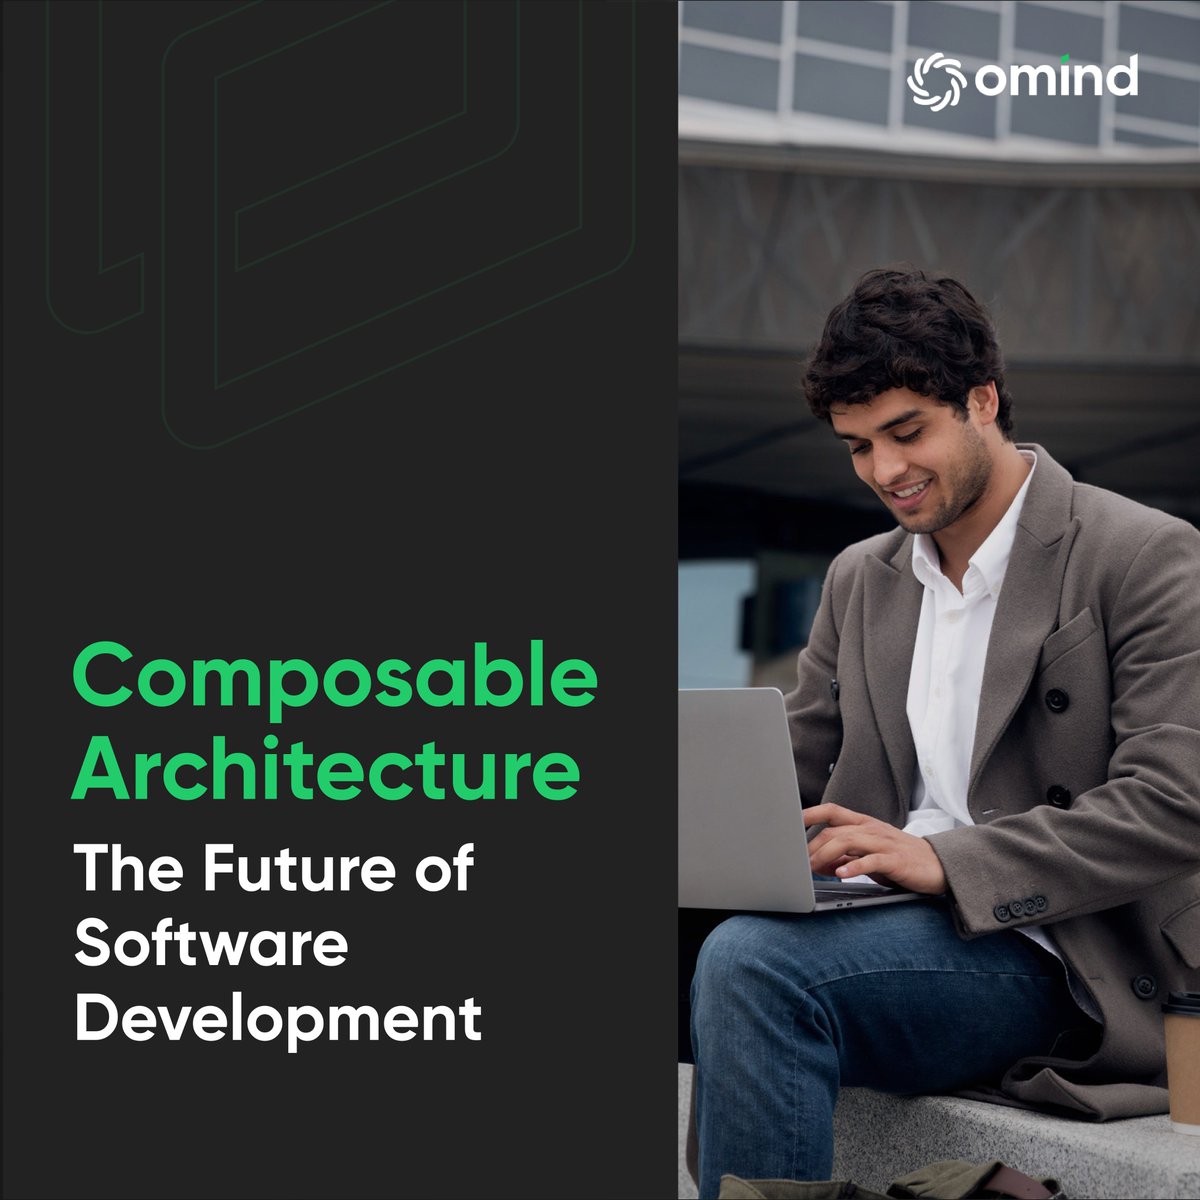 At Omind, we power exceptional Customer and Business Experiences through our Composable platform backed by AI/ML.

Unleash Composable Experiences, Schedule a Demo Today! omind.link/website

#ComposableArchitecture #Microservices #SoftwareDevelopment #Omind #AI